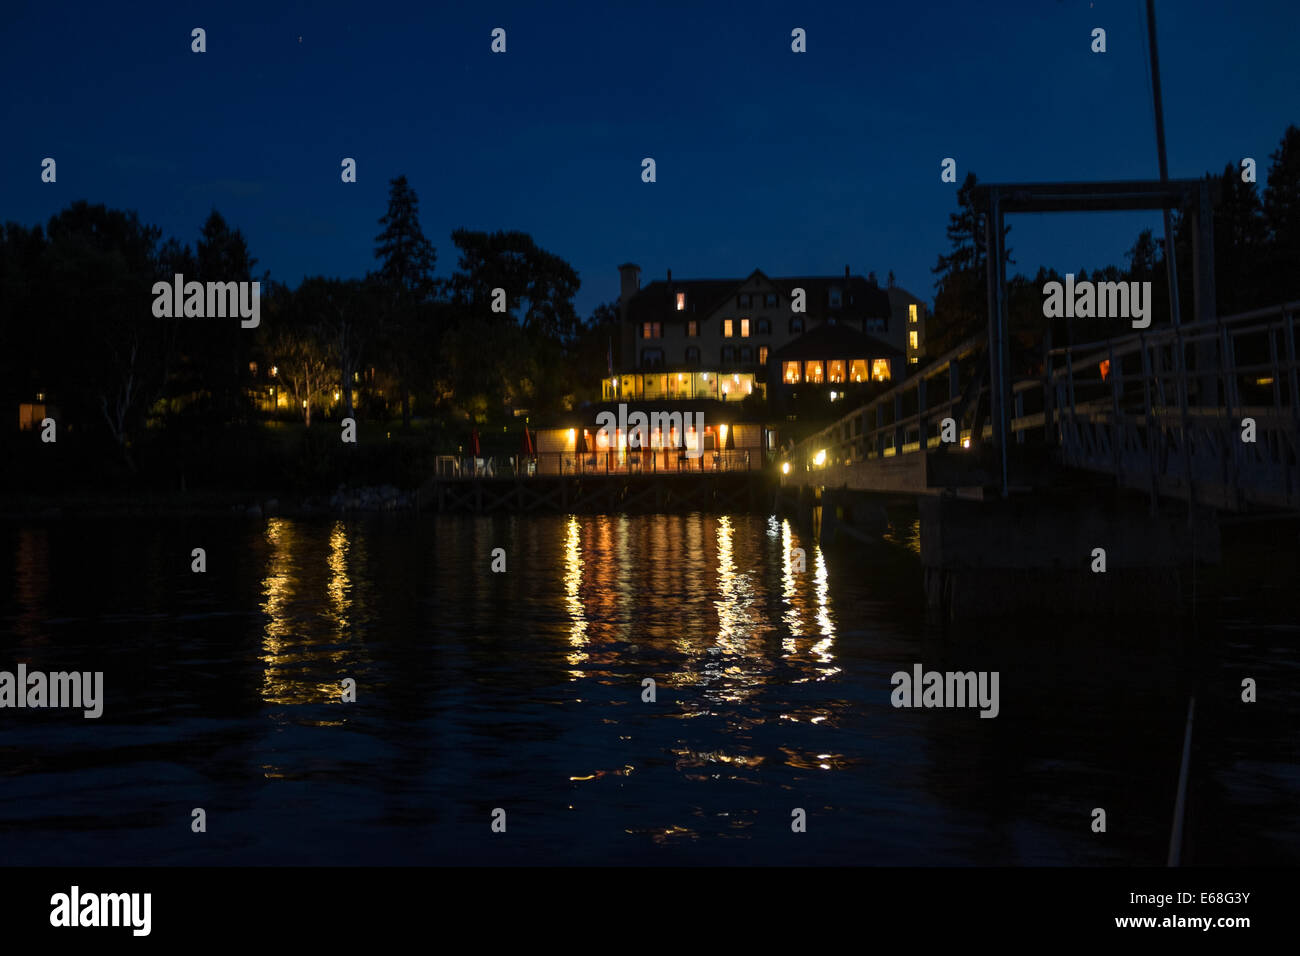 Southwest Harbor, ME - 8 August 2014. Claremont Hotel, Southwest Harbor, seen from the hotel dock at night Stock Photo